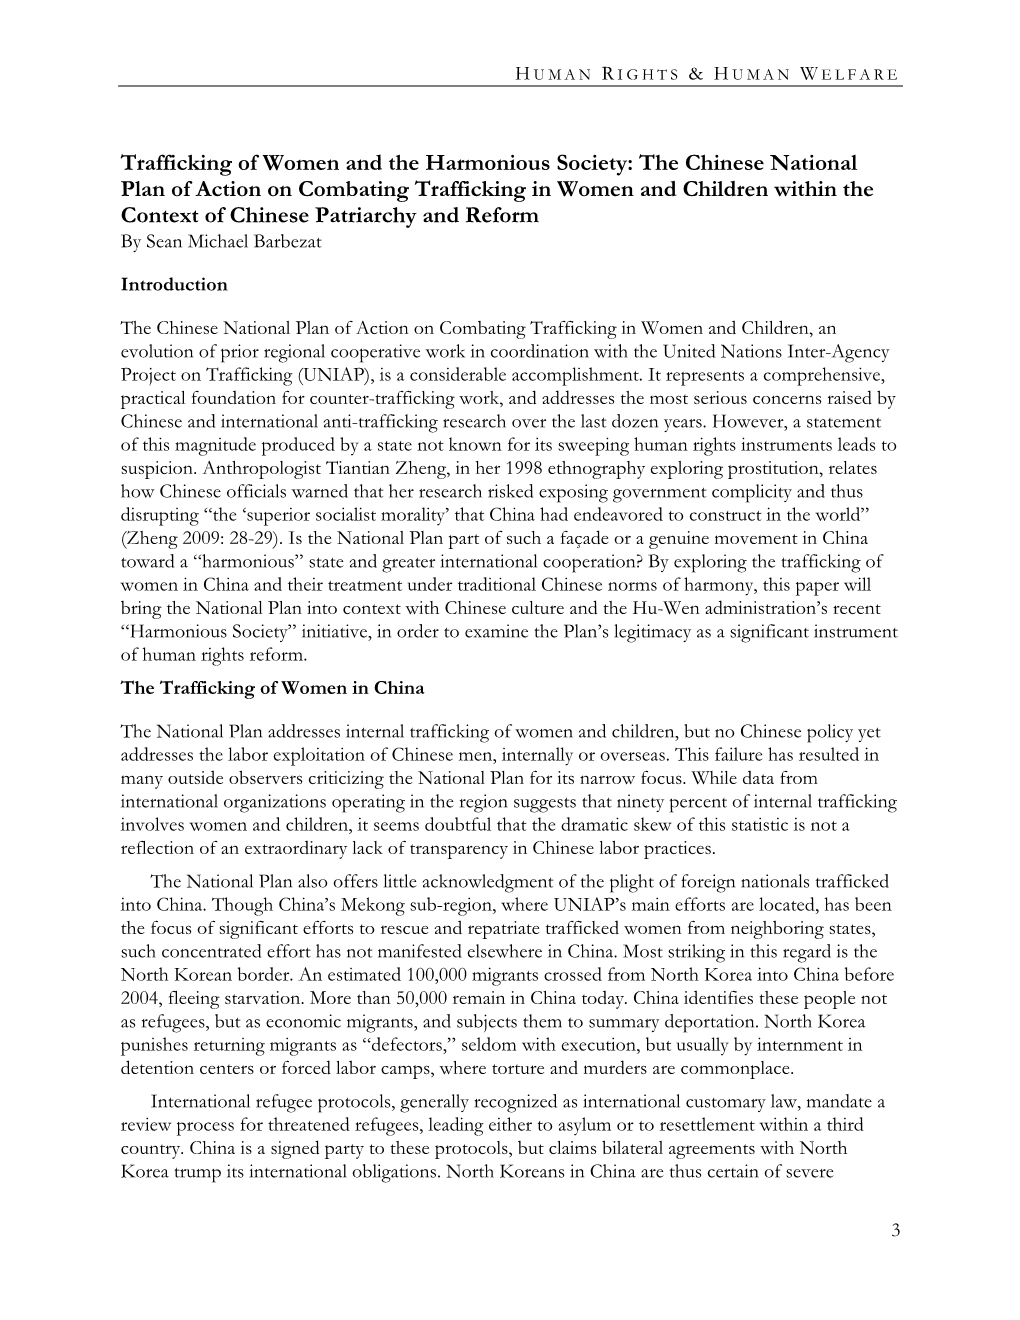 The Chinese National Plan of Action on Combating Trafficking in Women and Children Within the Context of Chinese Patriarchy and Reform by Sean Michael Barbezat